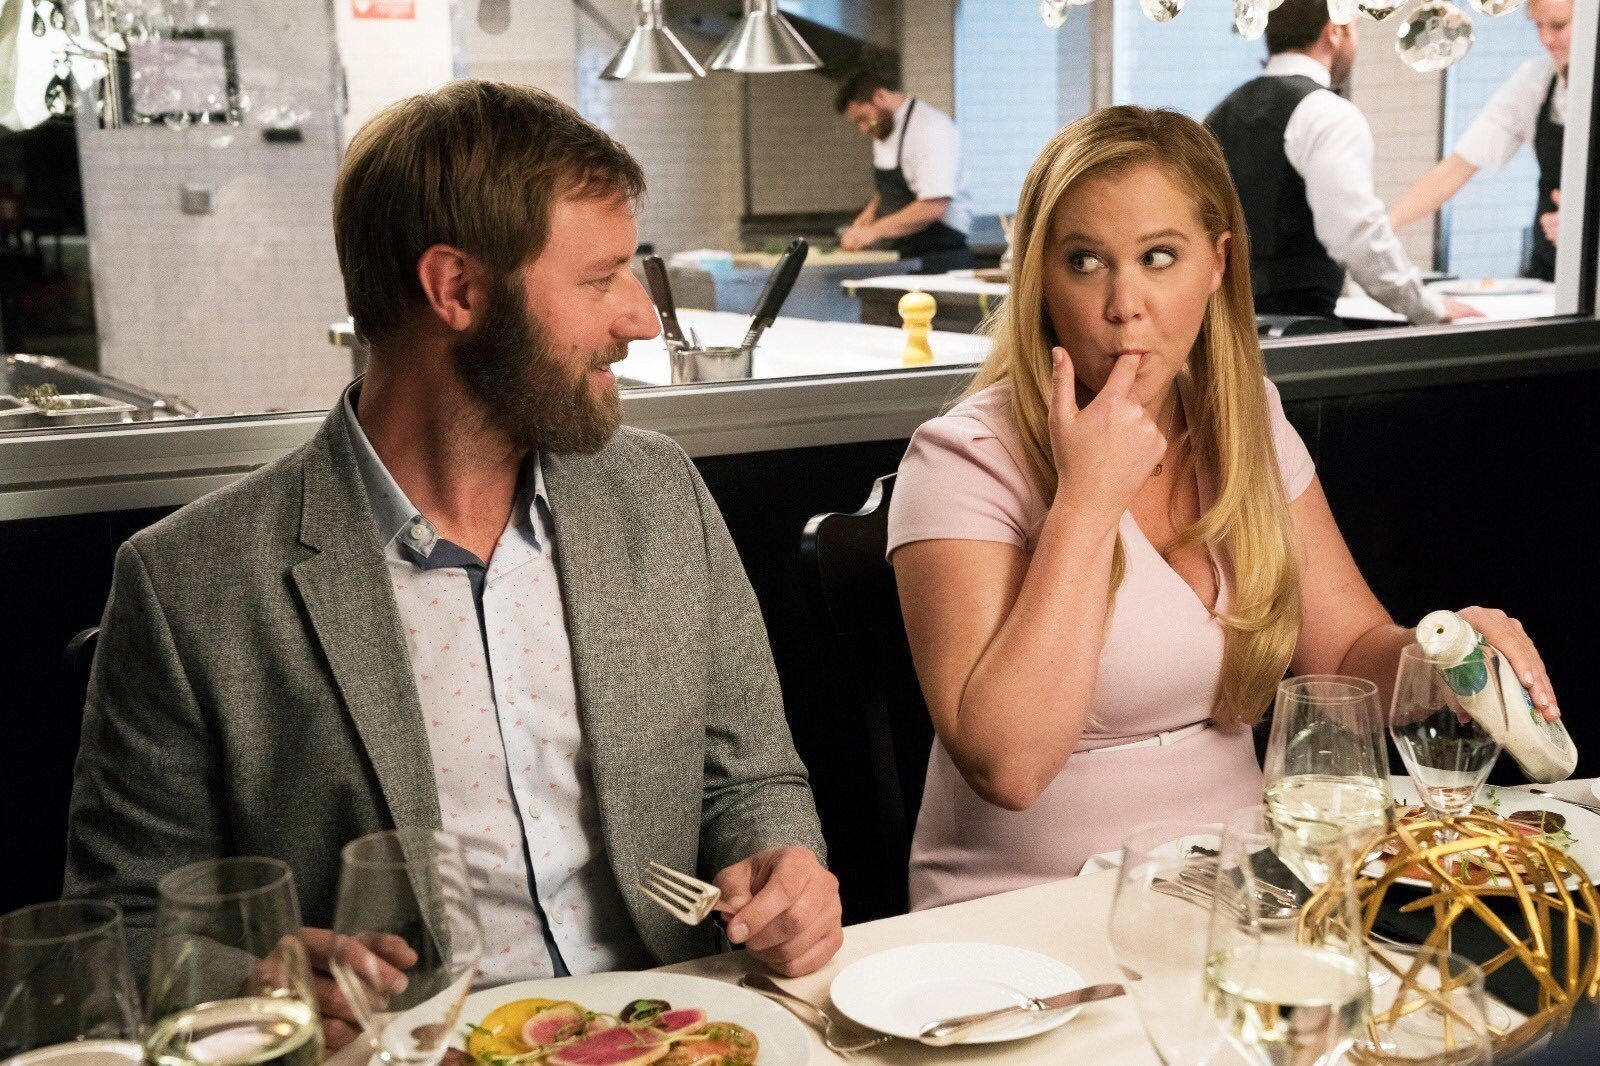 Rory Scovel and Amy Schumer (Renee Barrett) in STX Entertainment's I Feel Pretty (2018)